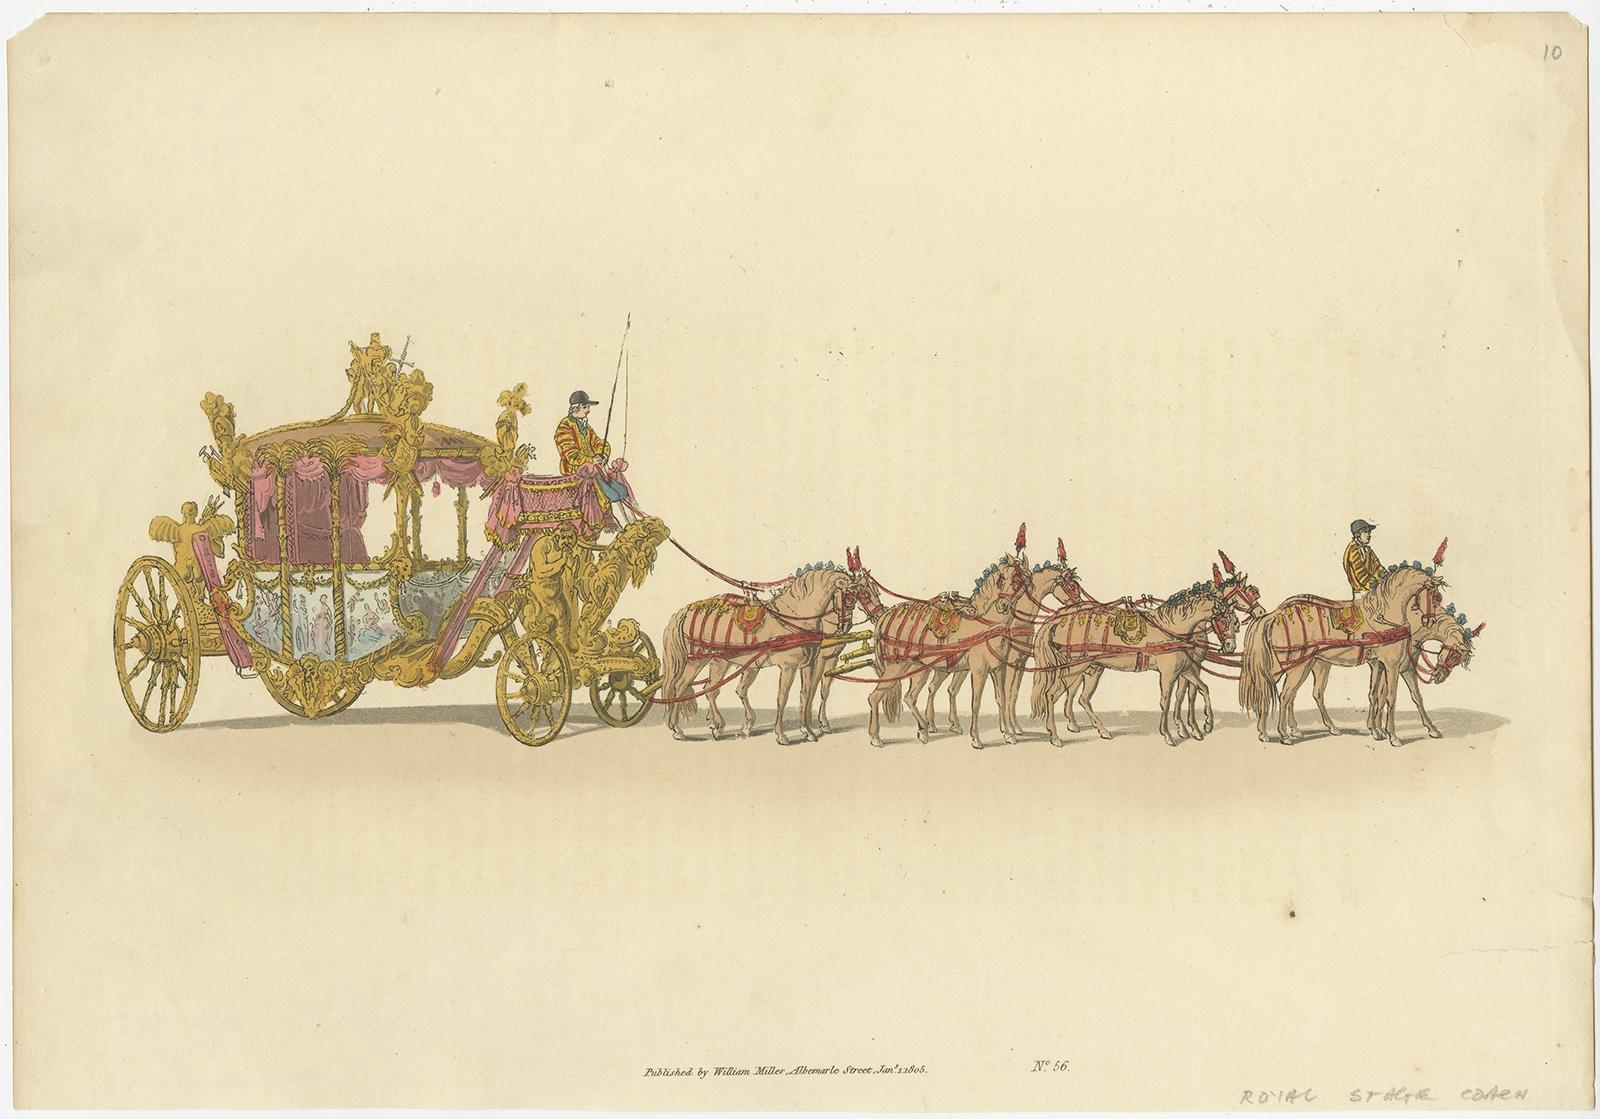 Antique print of the state carriage of George III. This print originates from 'The Costume of Great Britain' by William Henry Pyne. 

Artists and engravers: Published by William Miller.